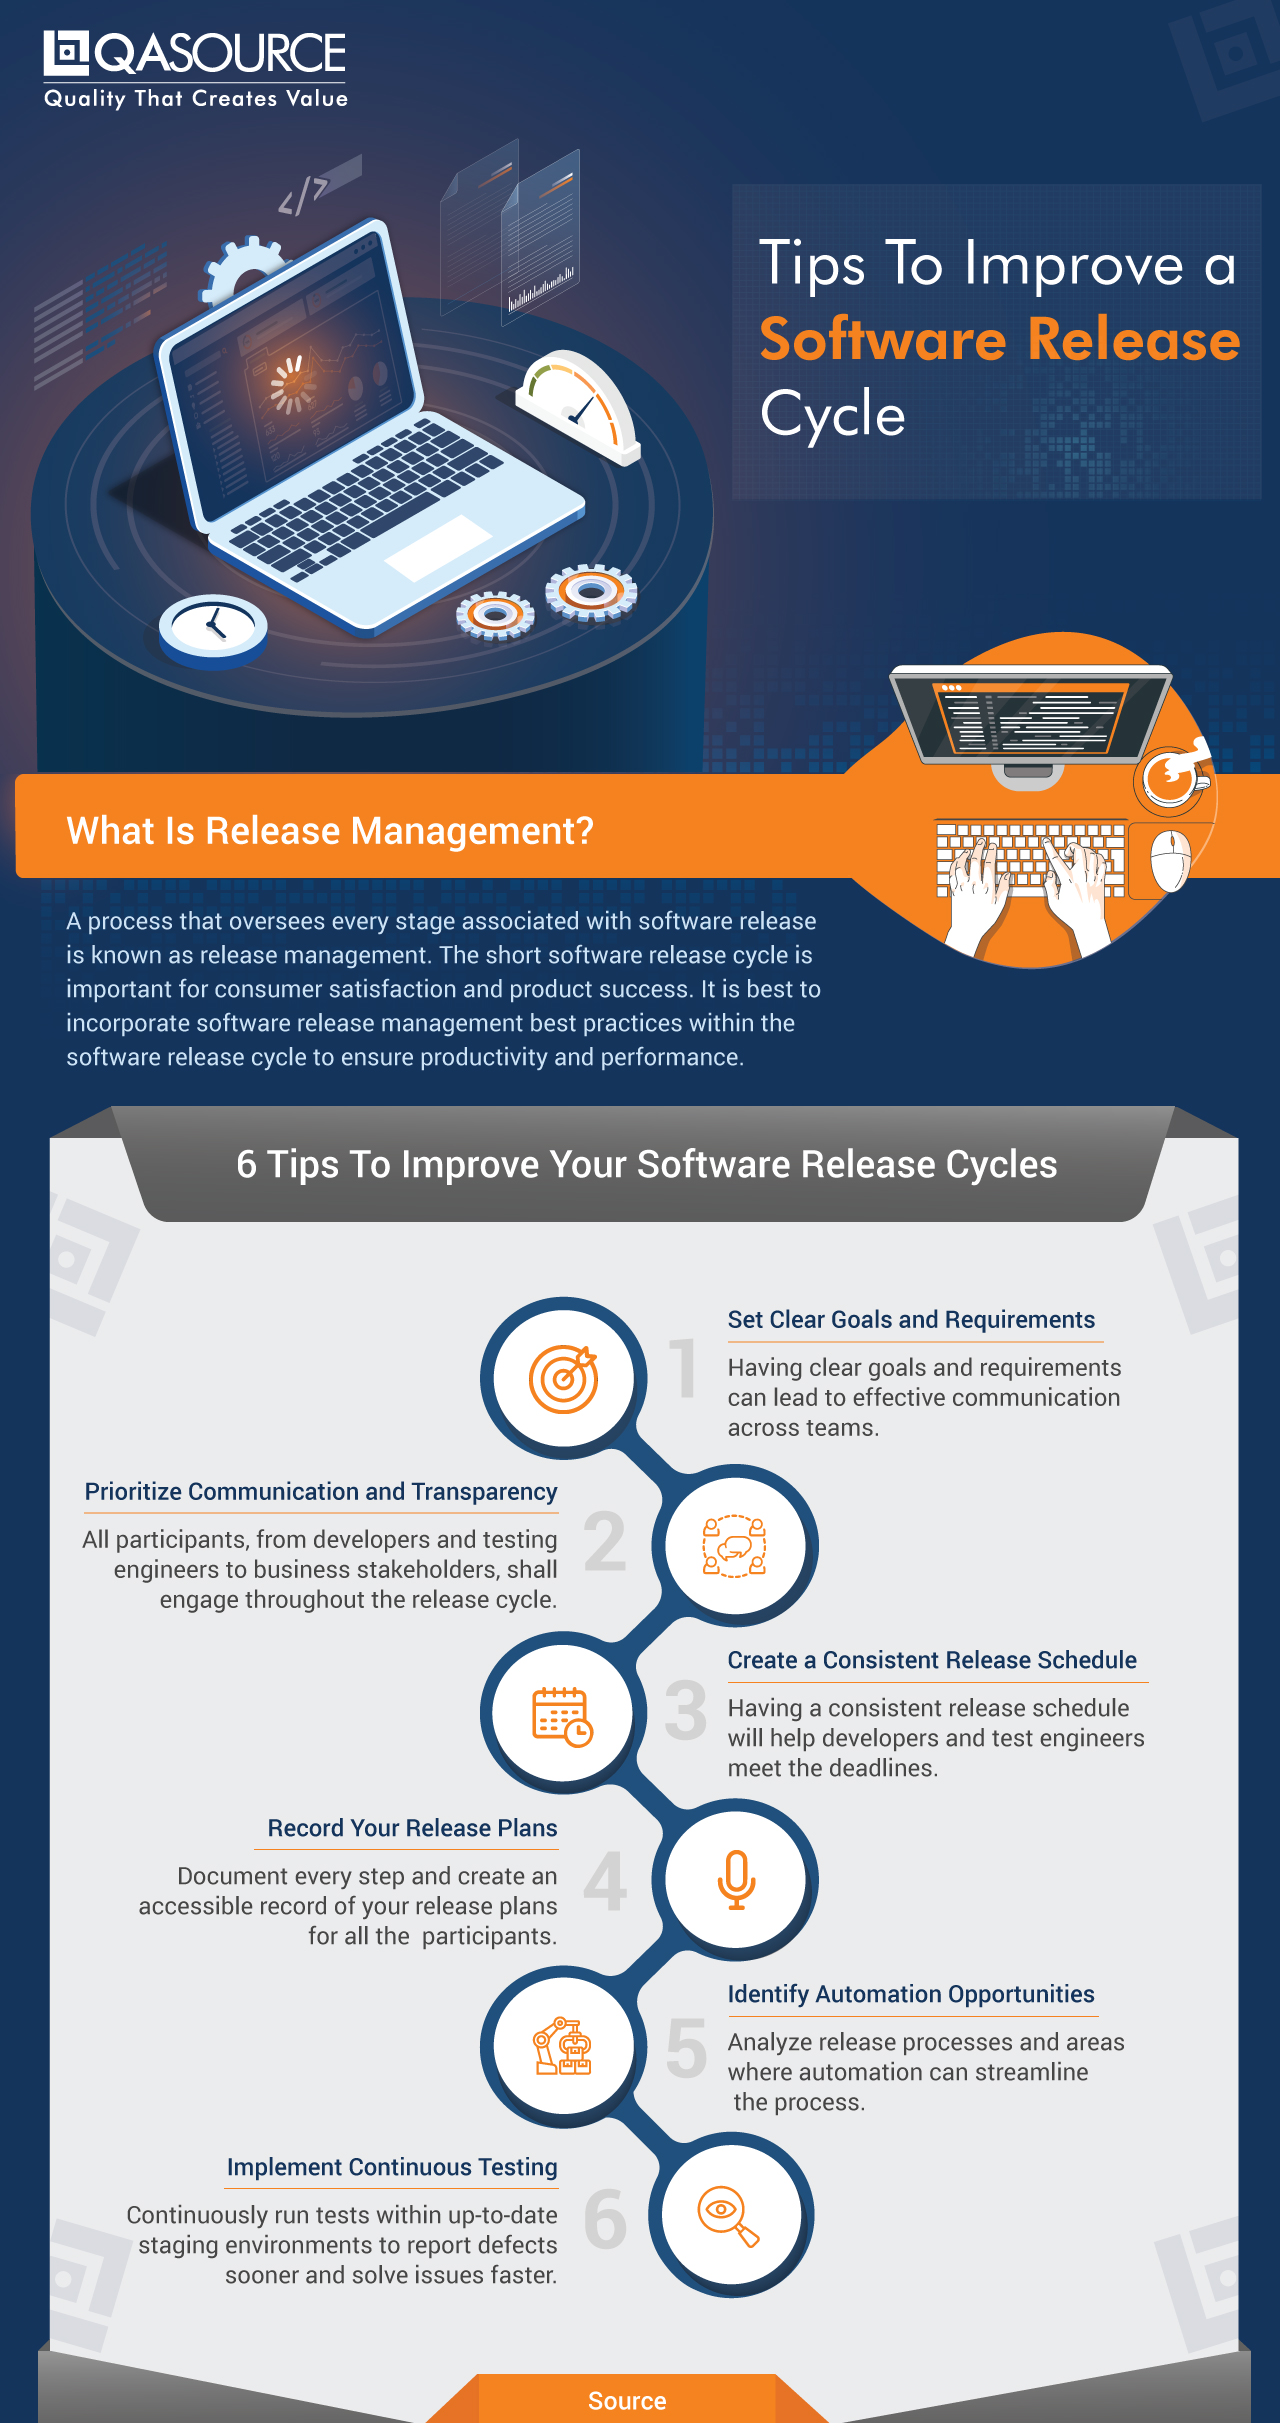 Tips to Improve a Software Release Cycle (Infographic)